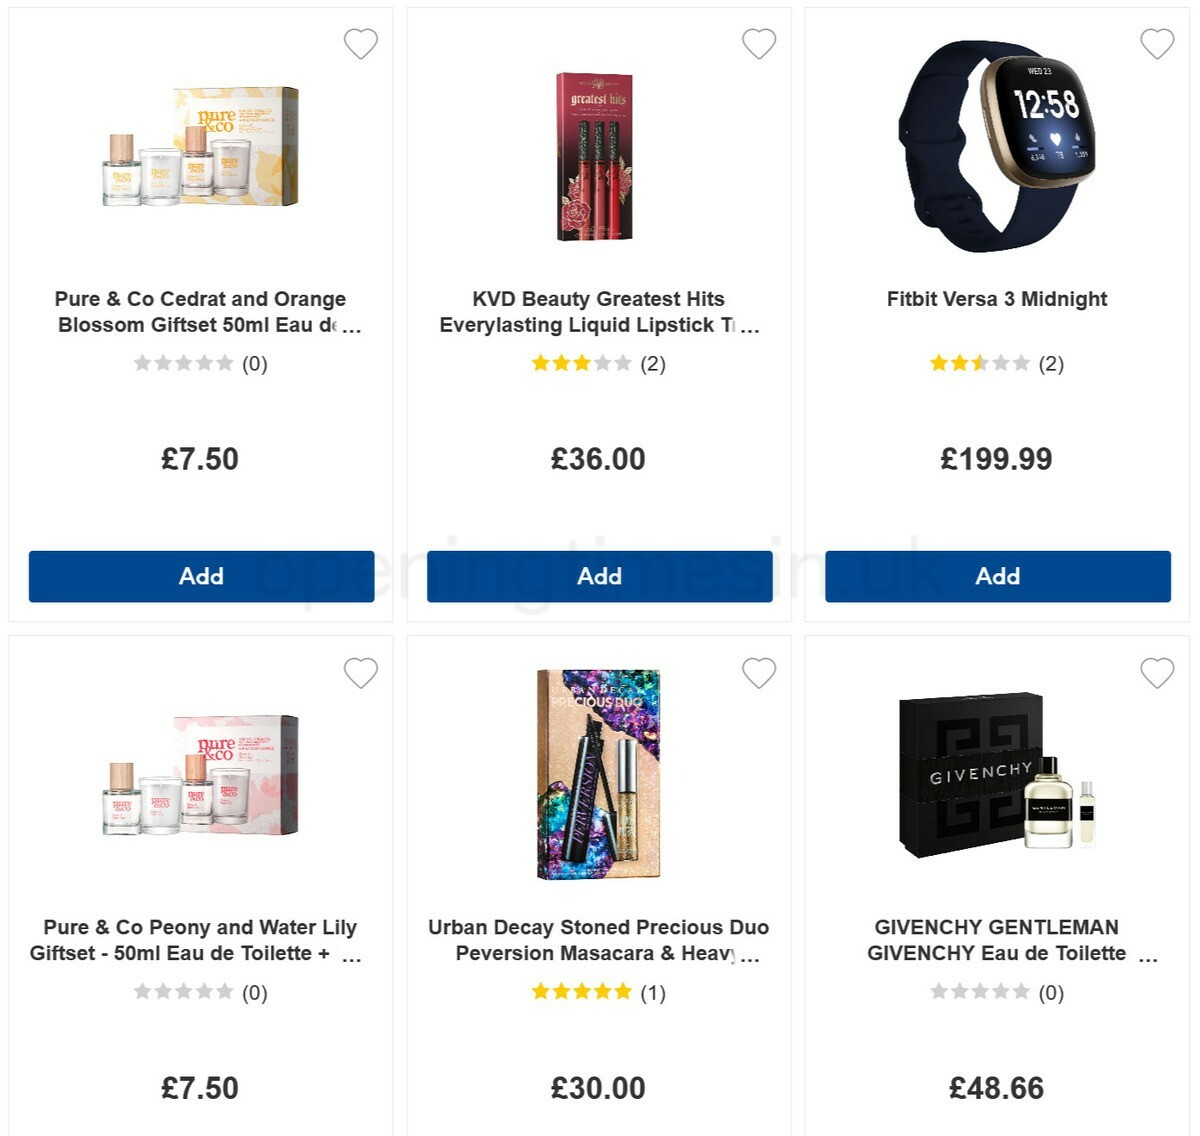 Boots Offers from 3 April